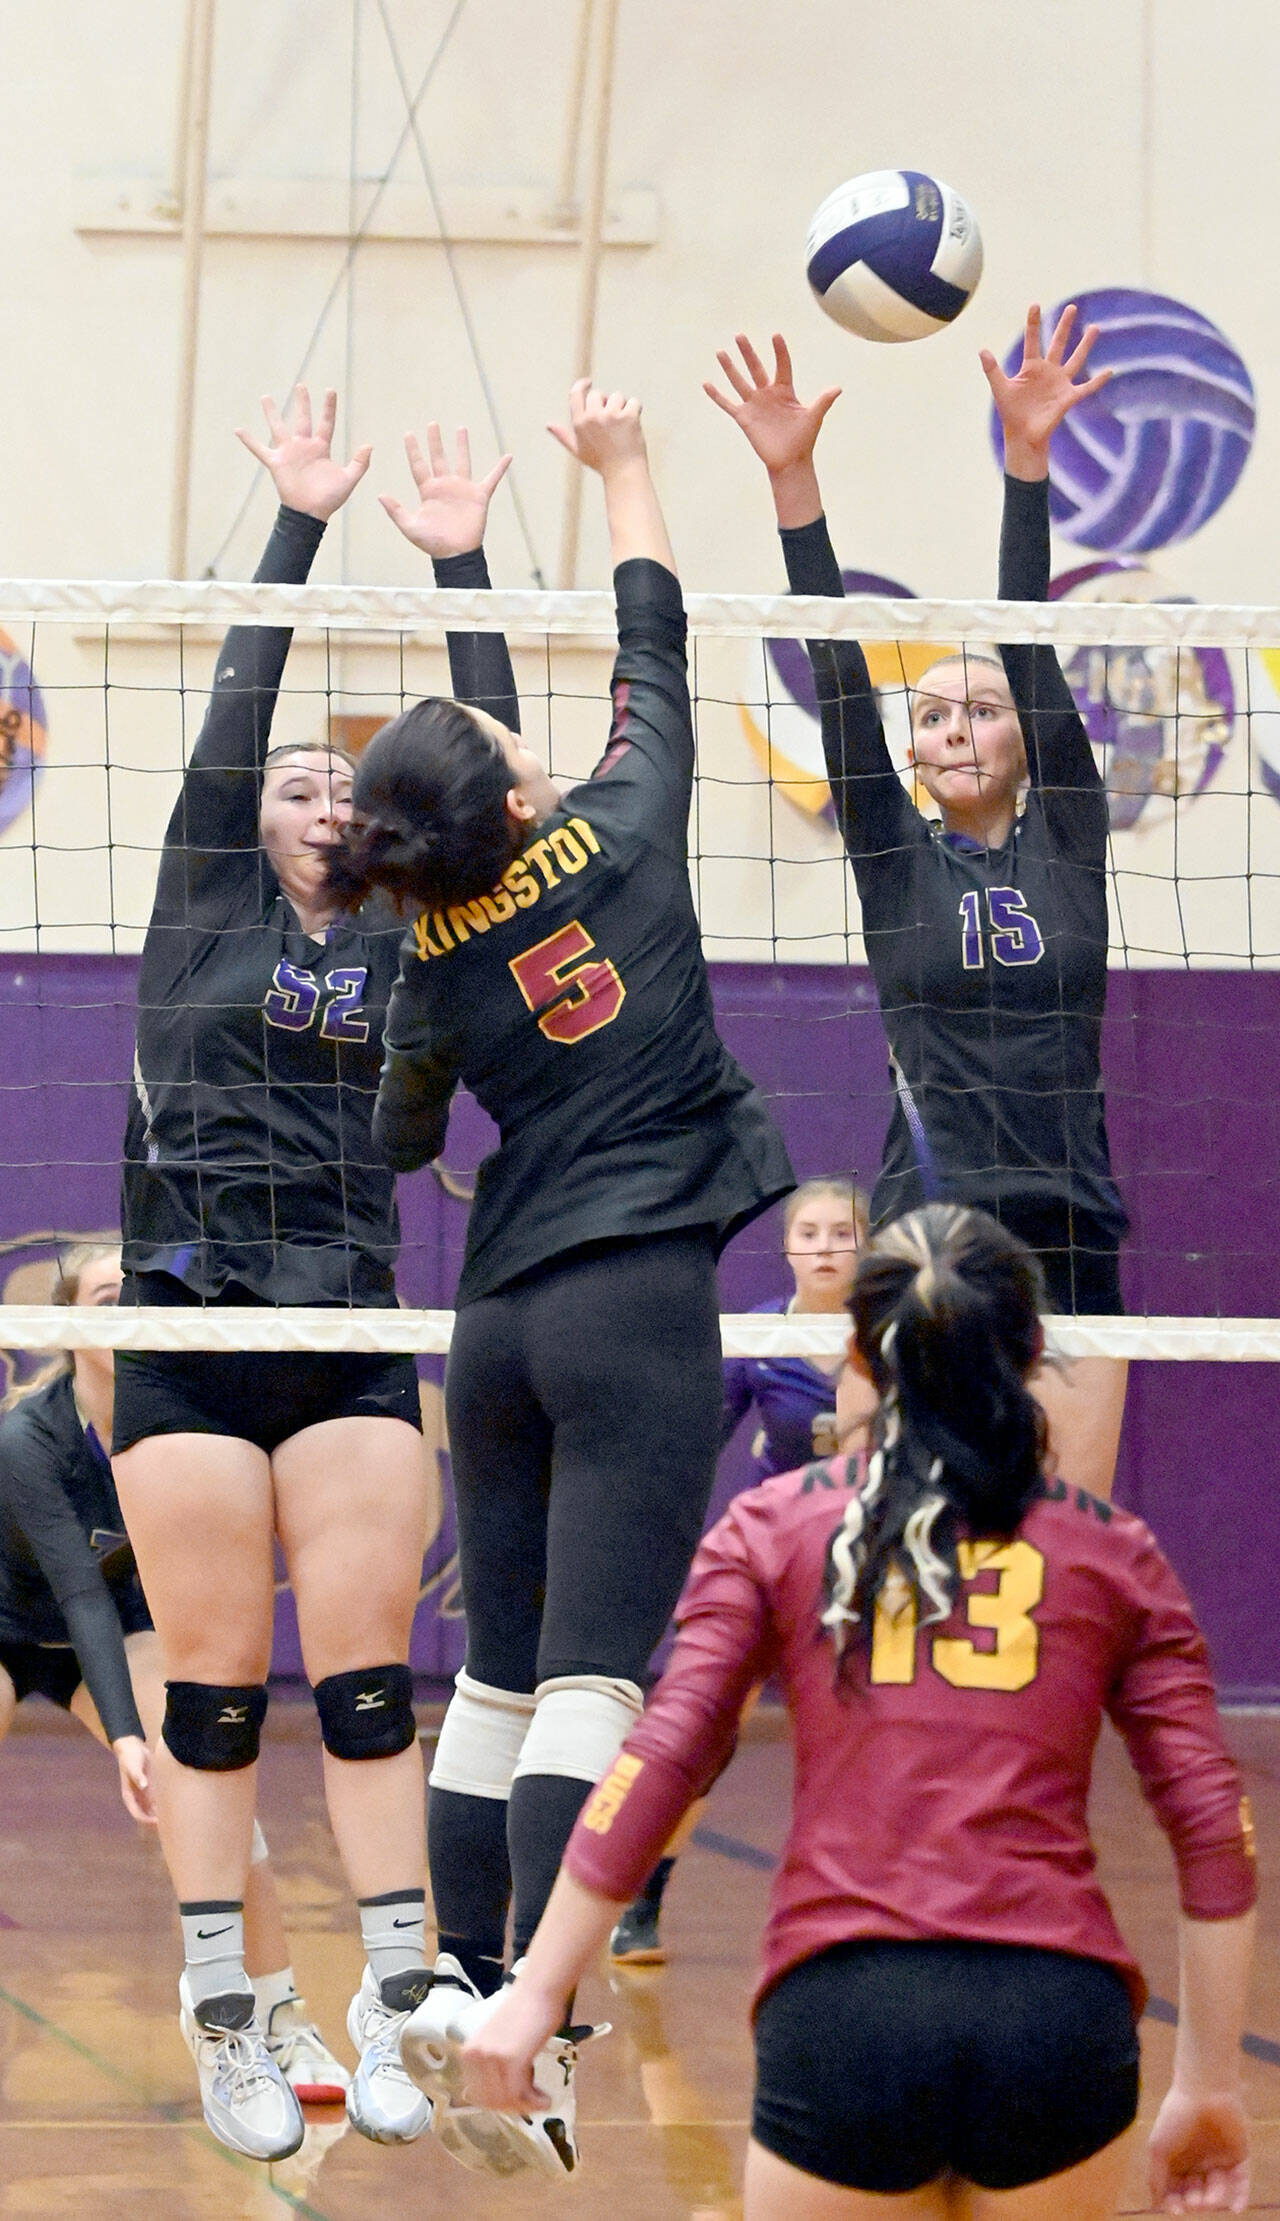 Michael Dashiell/Olympic Peninsula News Group
Sequim’s Sammie Bacon, left, and Kendall Hastings attempt to defend against a shot by Kingston’s Grace Mosco as Kingston libero Lily Wright looks on during the Wolves 3-0 senior night victory on Thursday.